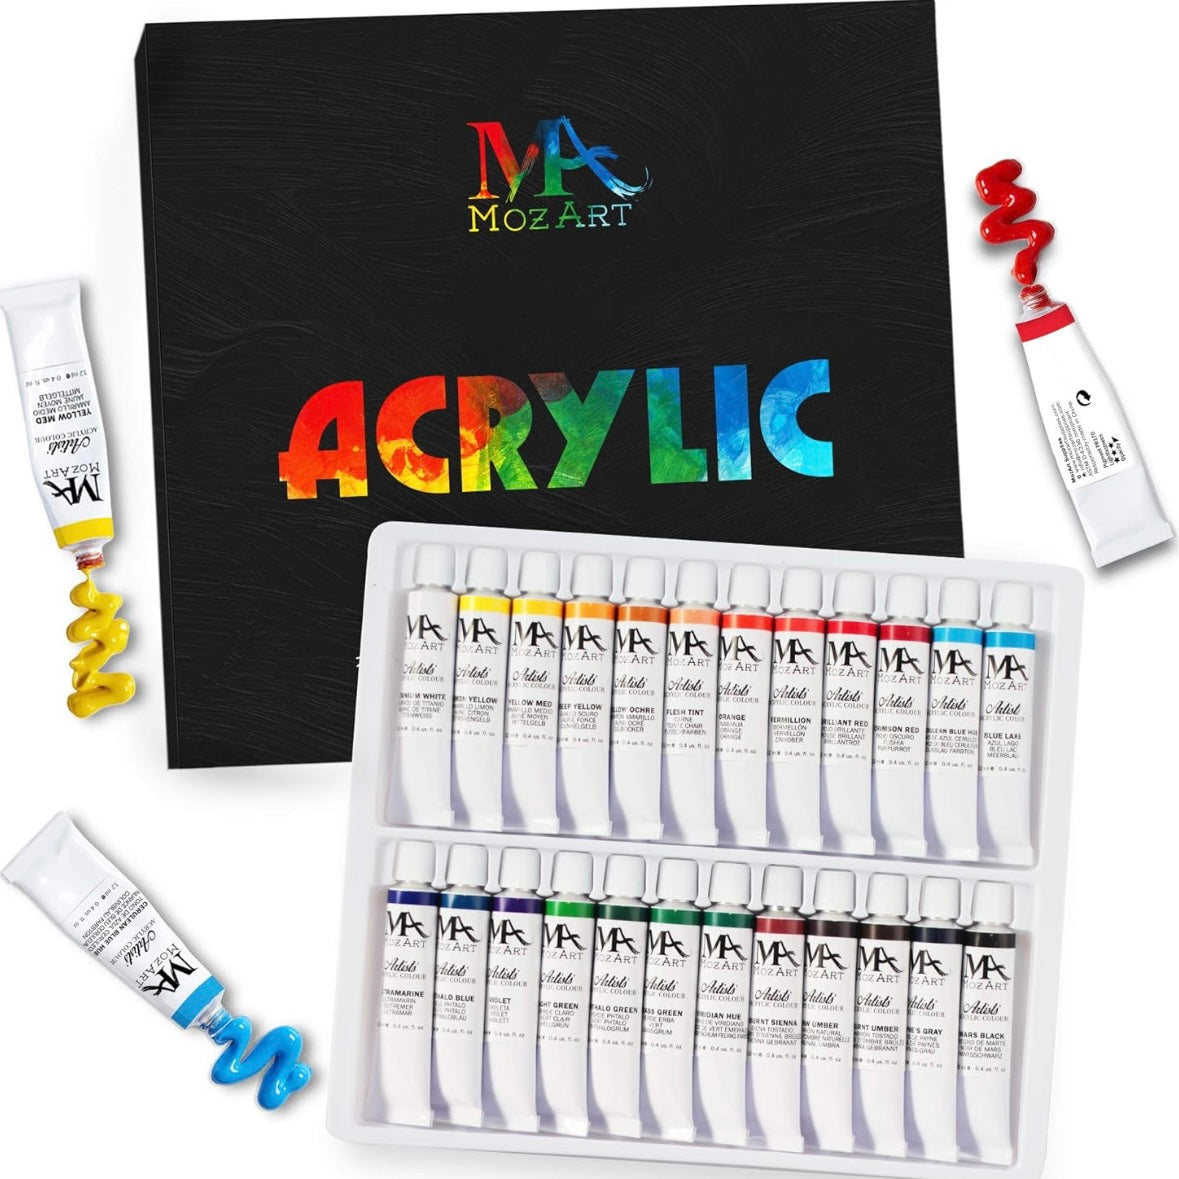 MozArt 24 Acrylic Professional 12ml Tubes Paint Set - Ideal for Canvas, Ceramics, Crafts & Acrylic Pouring